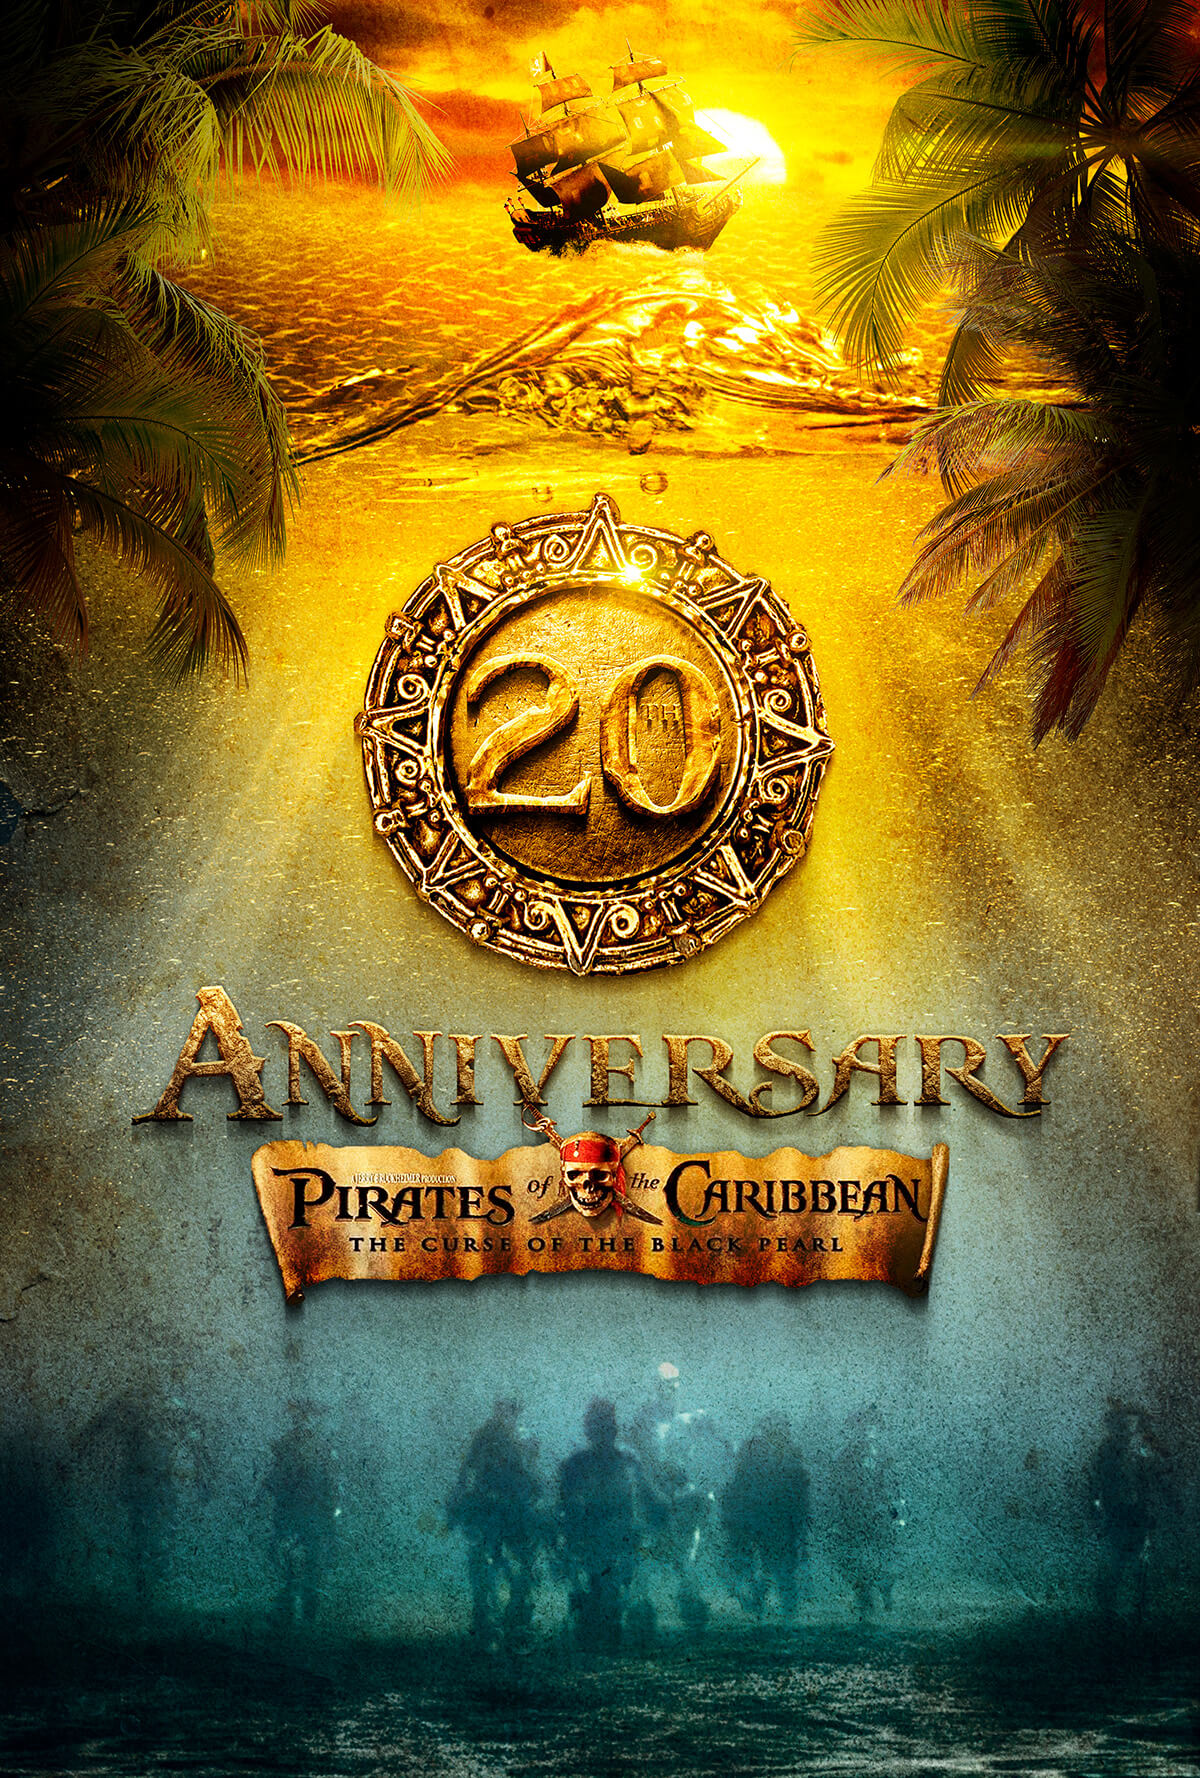 Pirates of the Caribbean Sea - The Curse of the Black Pearl (20th Anniversary Edition)